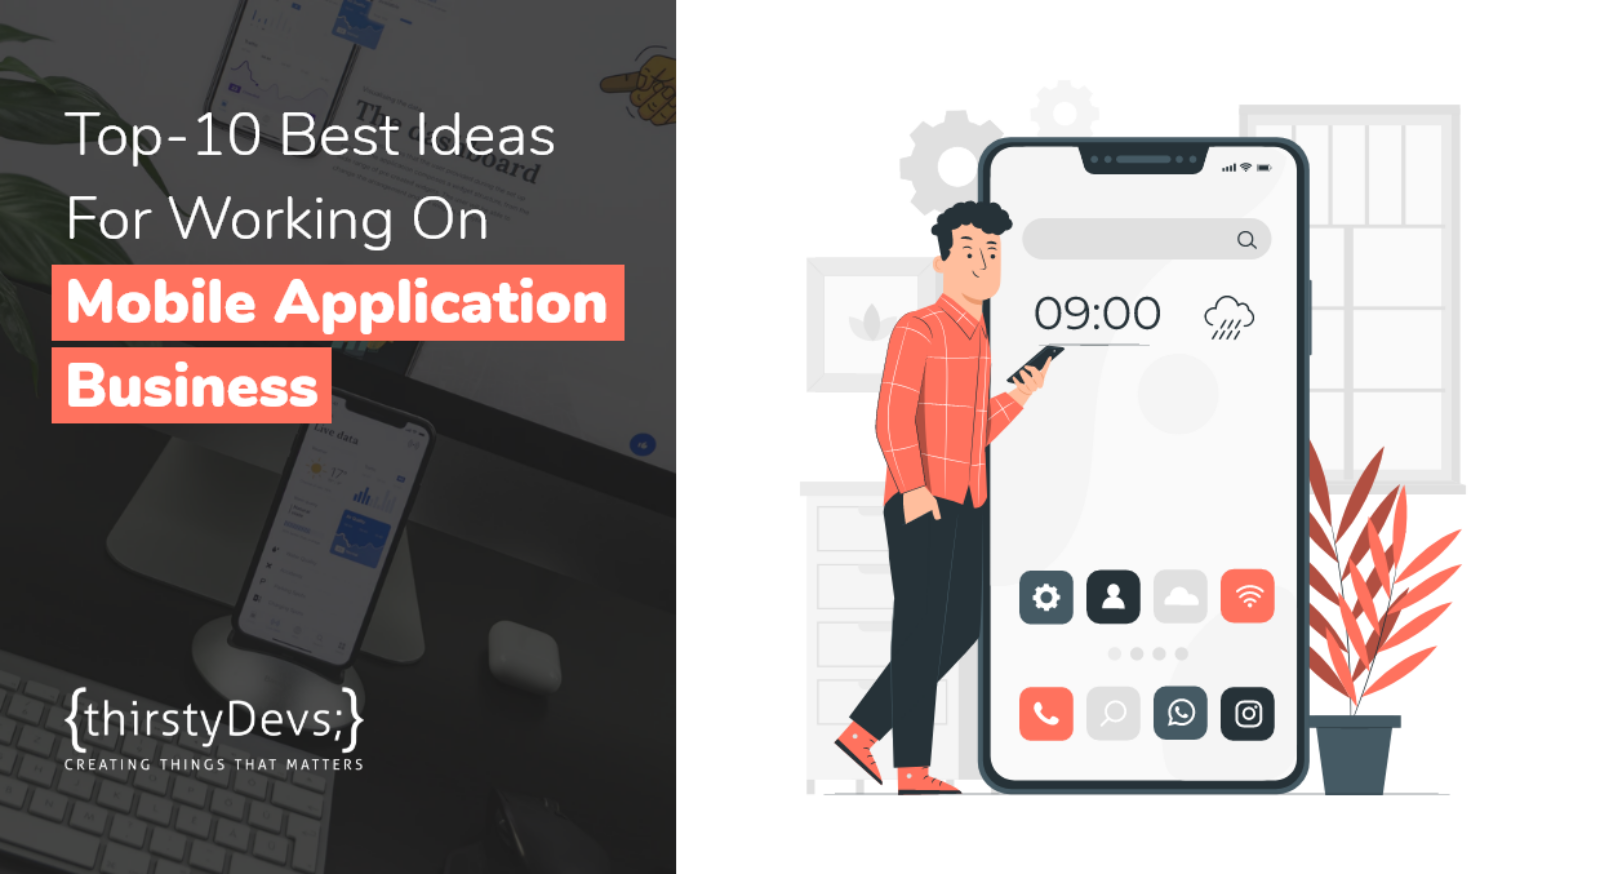 TOP-10 Best Ideas For Working On Mobile Applications For Business